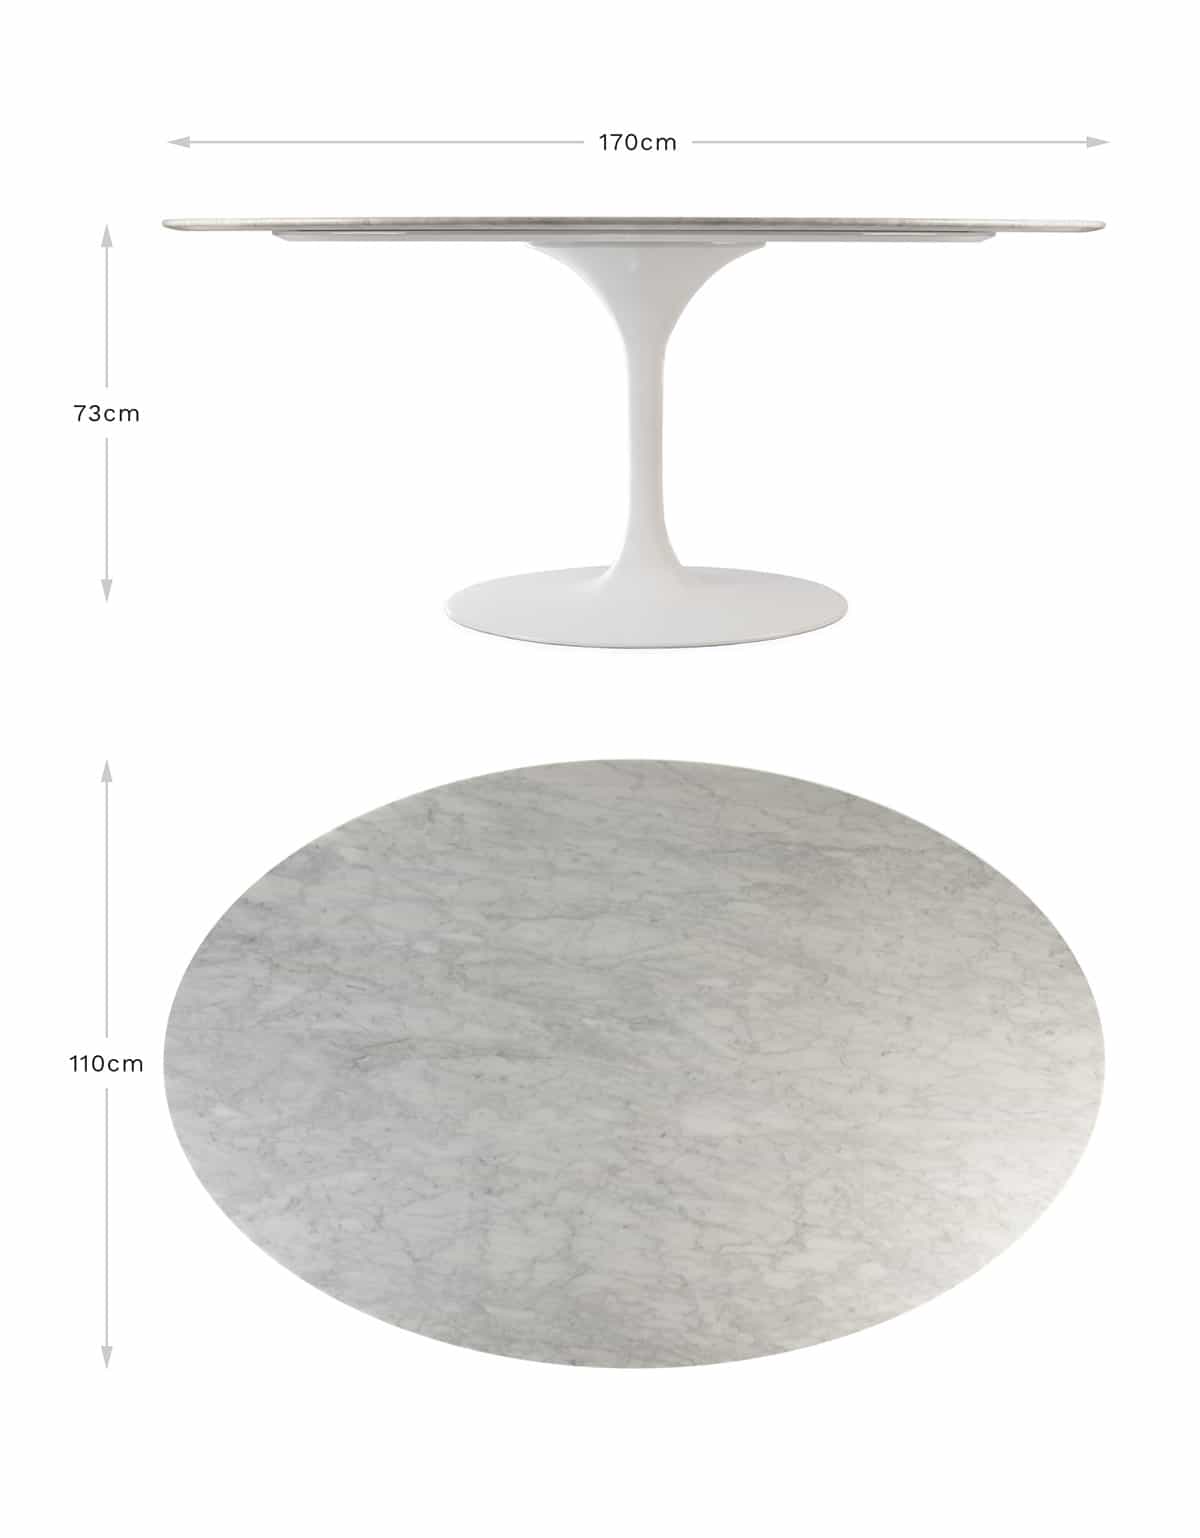 A large visual image that details the dimensions of the 170 x 110 cm Oval Saarinen Tulip Table with arrows denoted the height, width and length